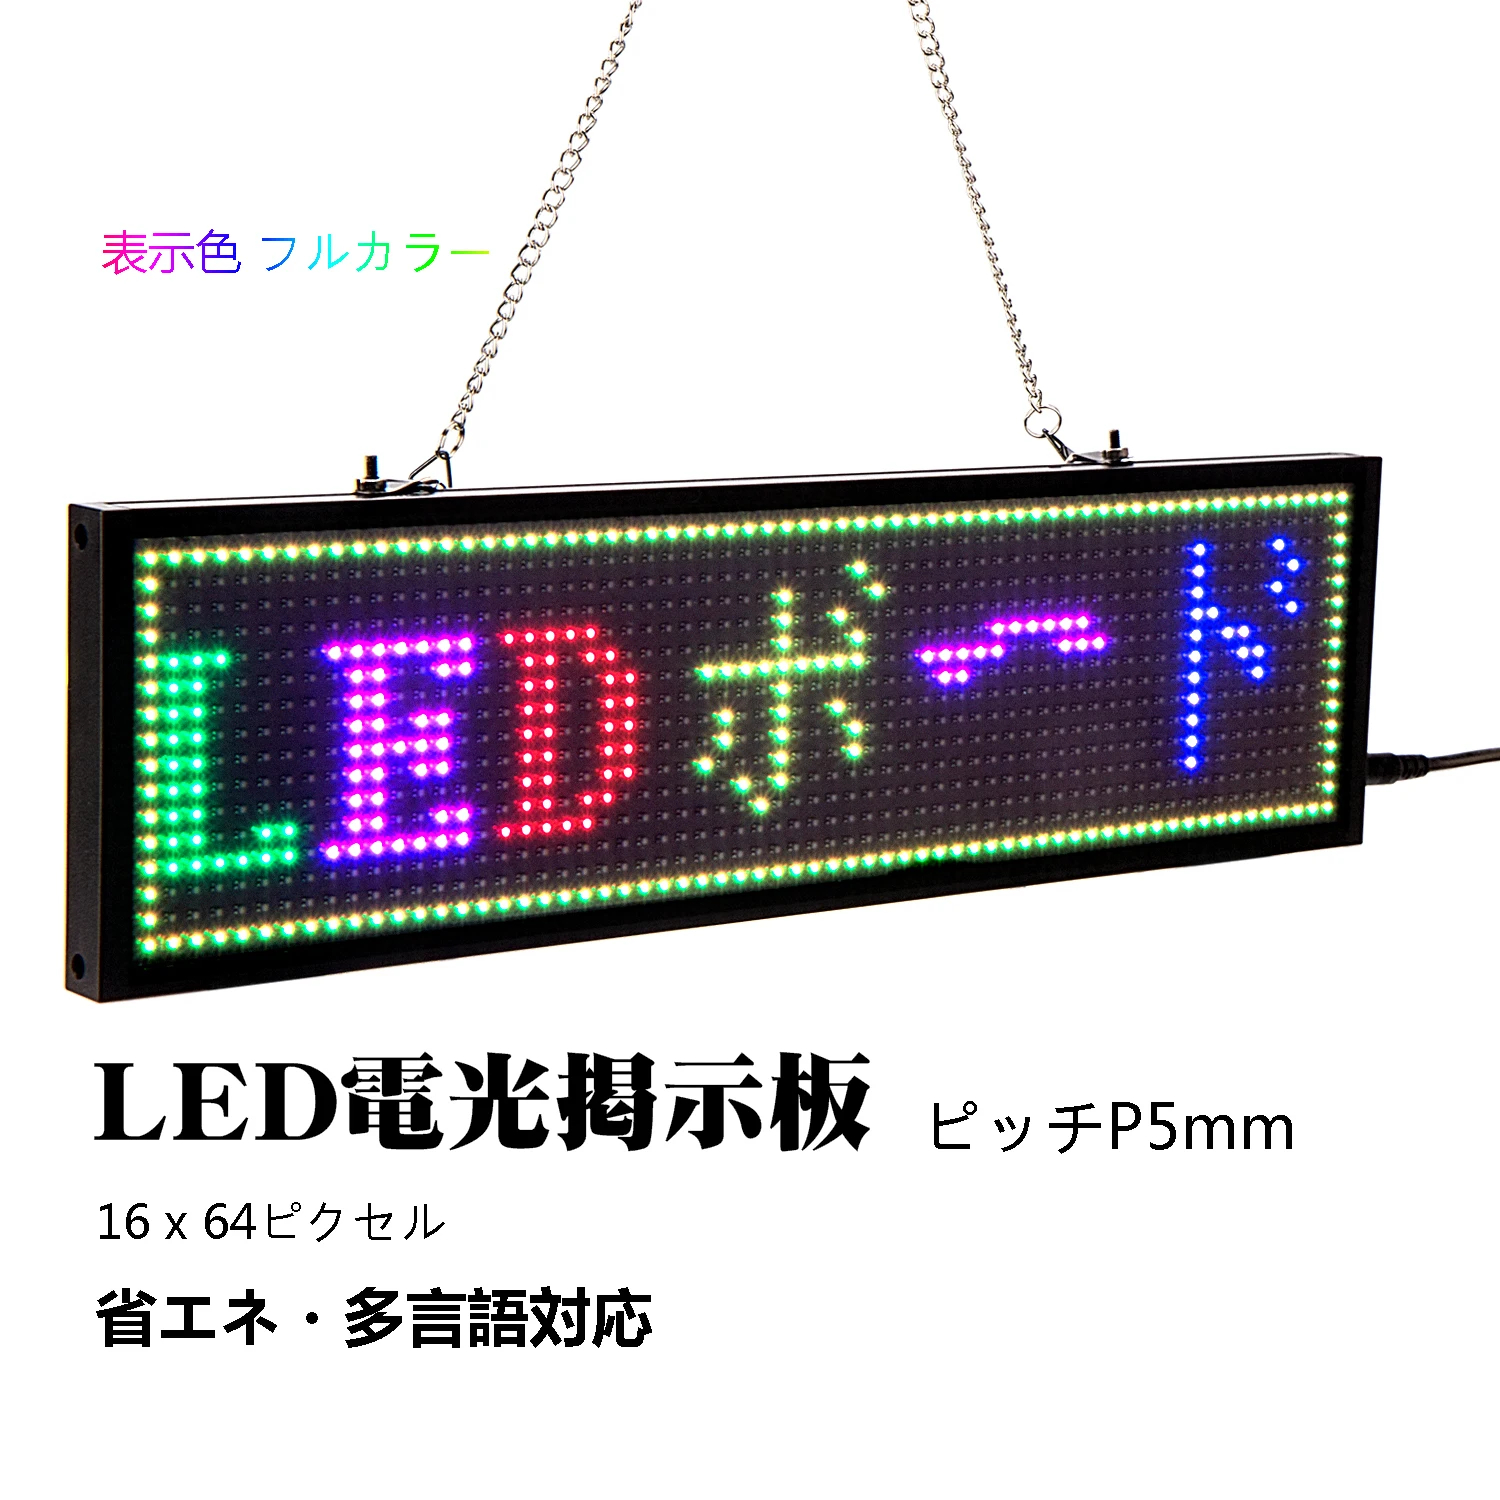 LED electronic scoreboard energy saving LED sign P5 RGB full color led メッセージサインボード WiFi connect smart phone for business store school advertising the programmable for indoor